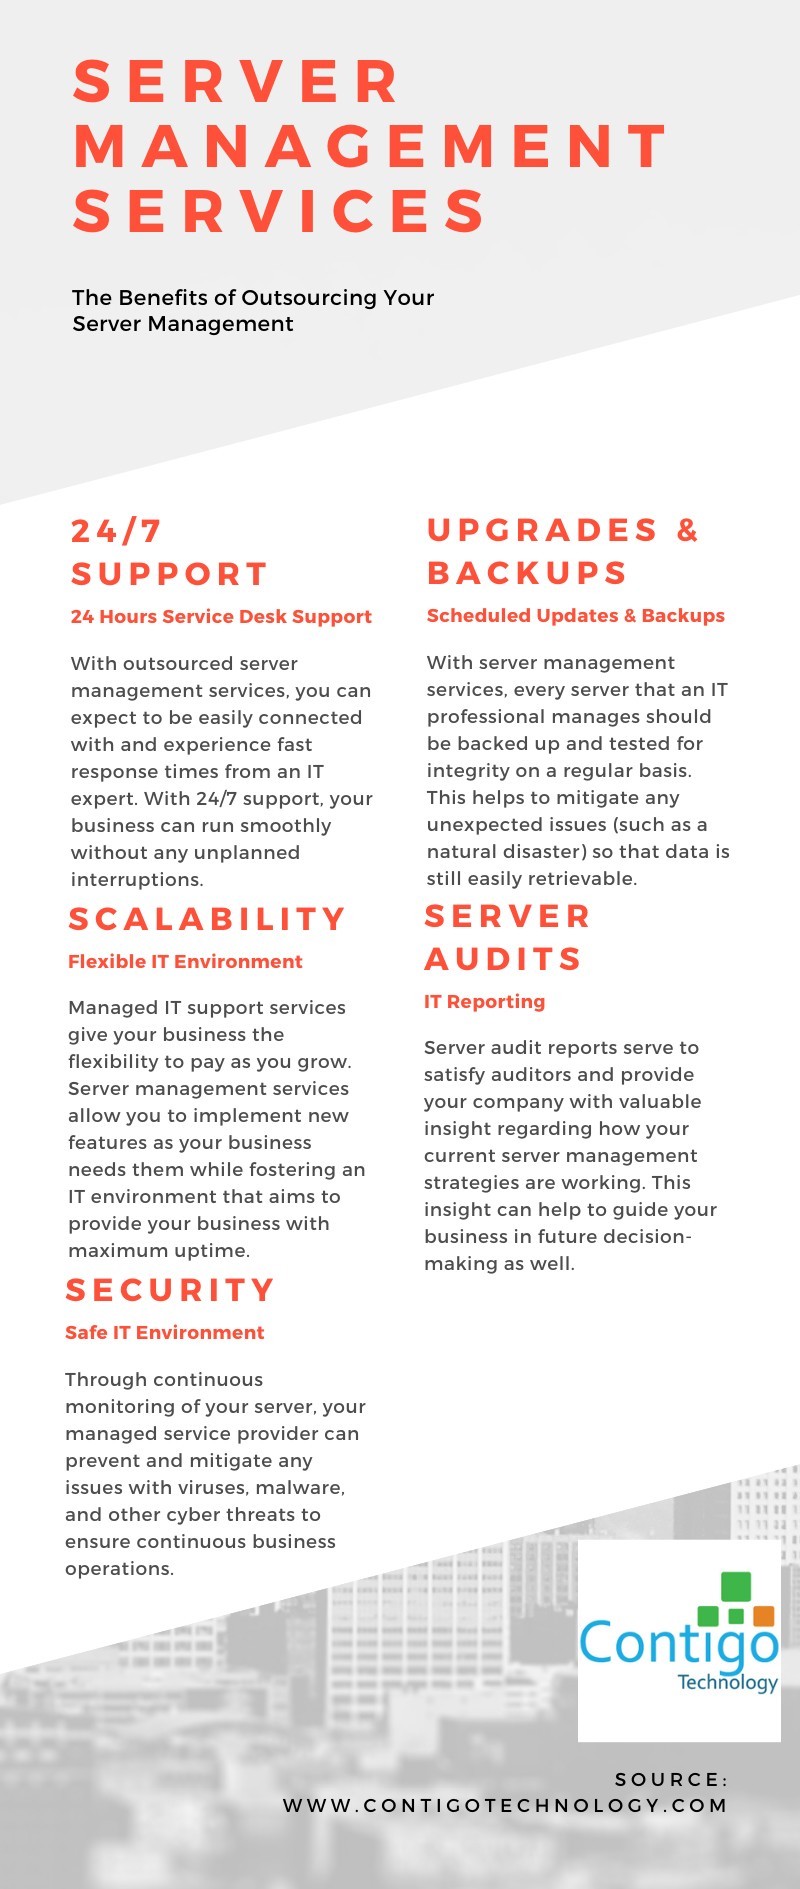 The Benefits of Outsourcing Server Management